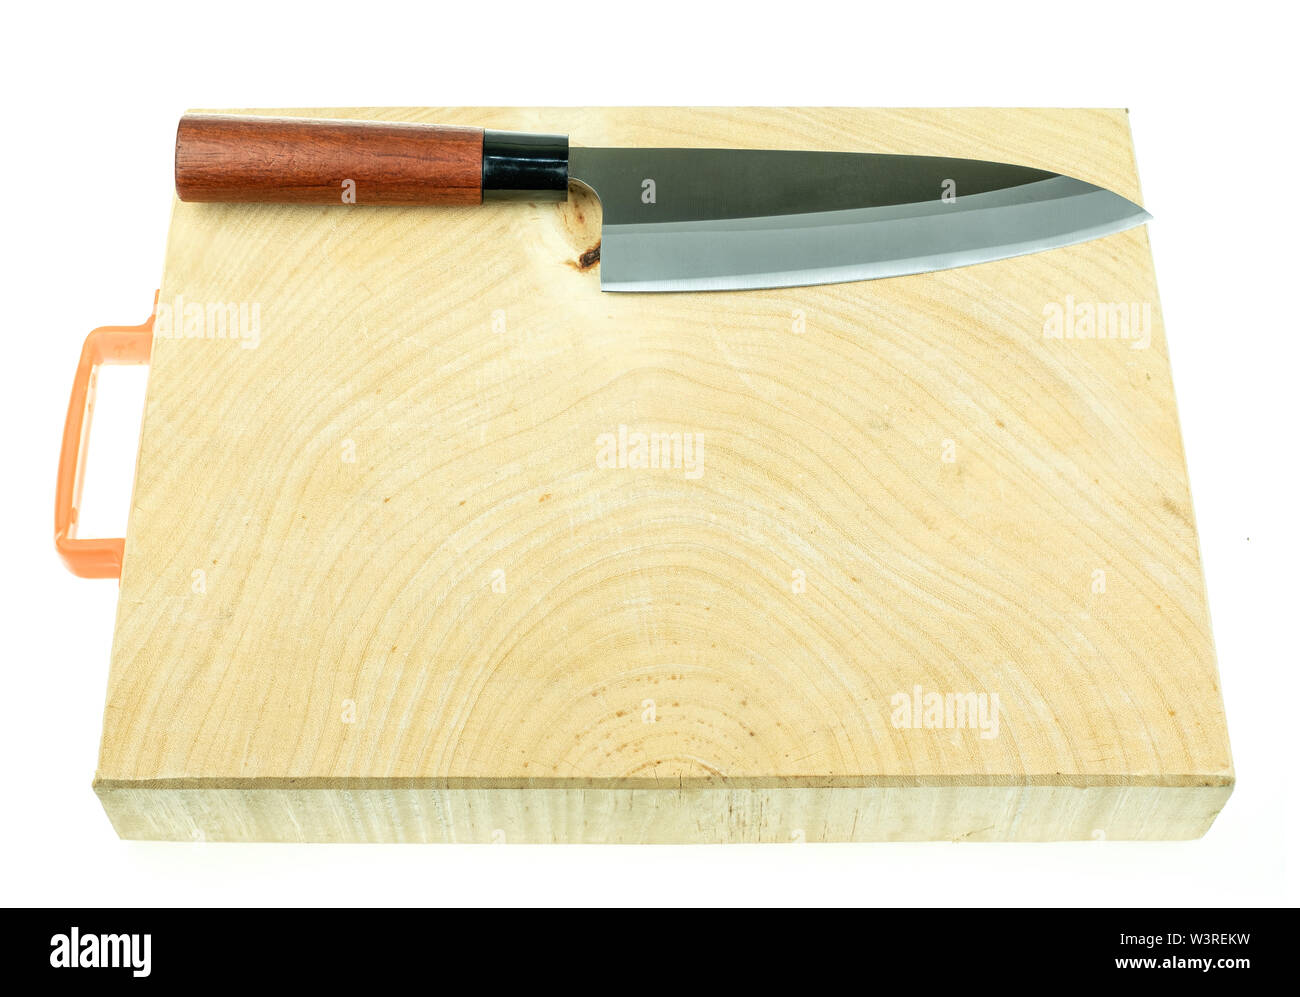 Kitchen Knife And Wood Butcher Block Countertop On White